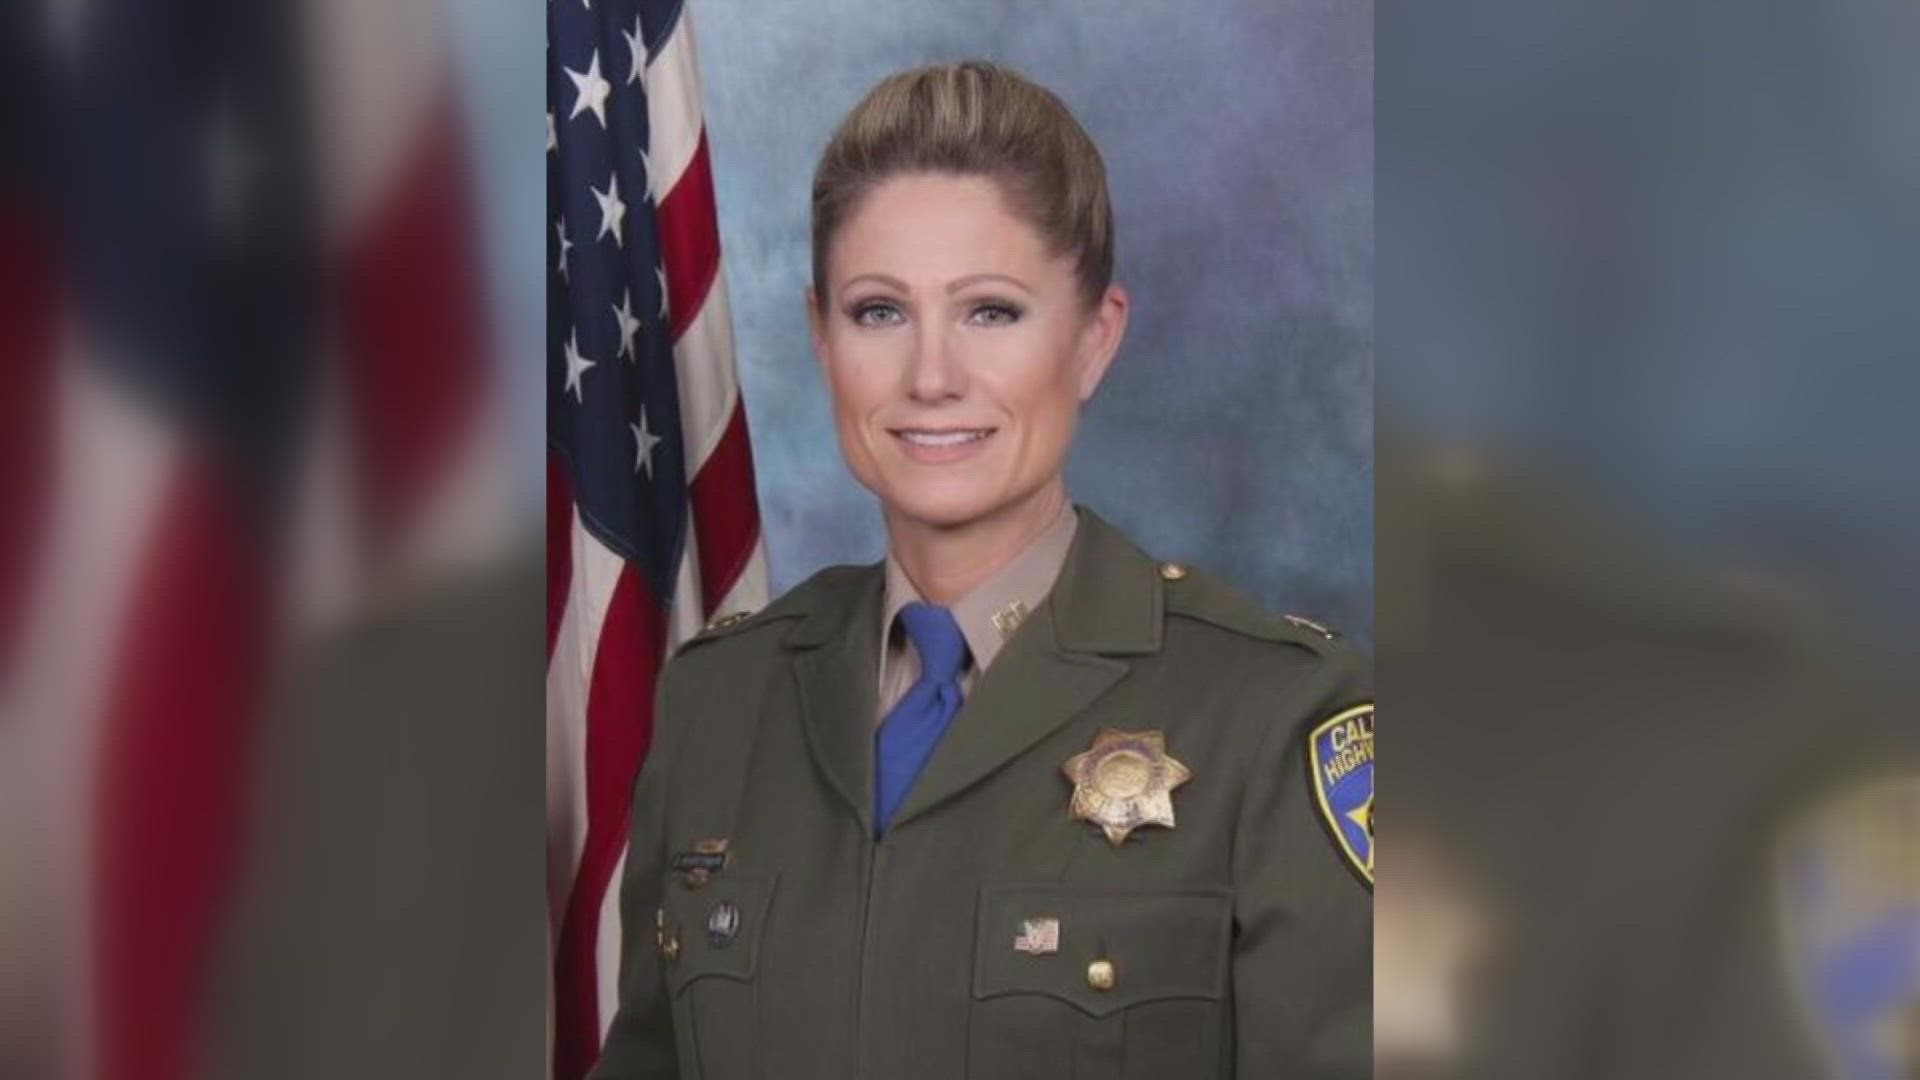 A friend of Michael Harding said he believes the CHP Yuba-Sutter Commander got a hired gun to kill her husband for her. We dig deeper into the story.